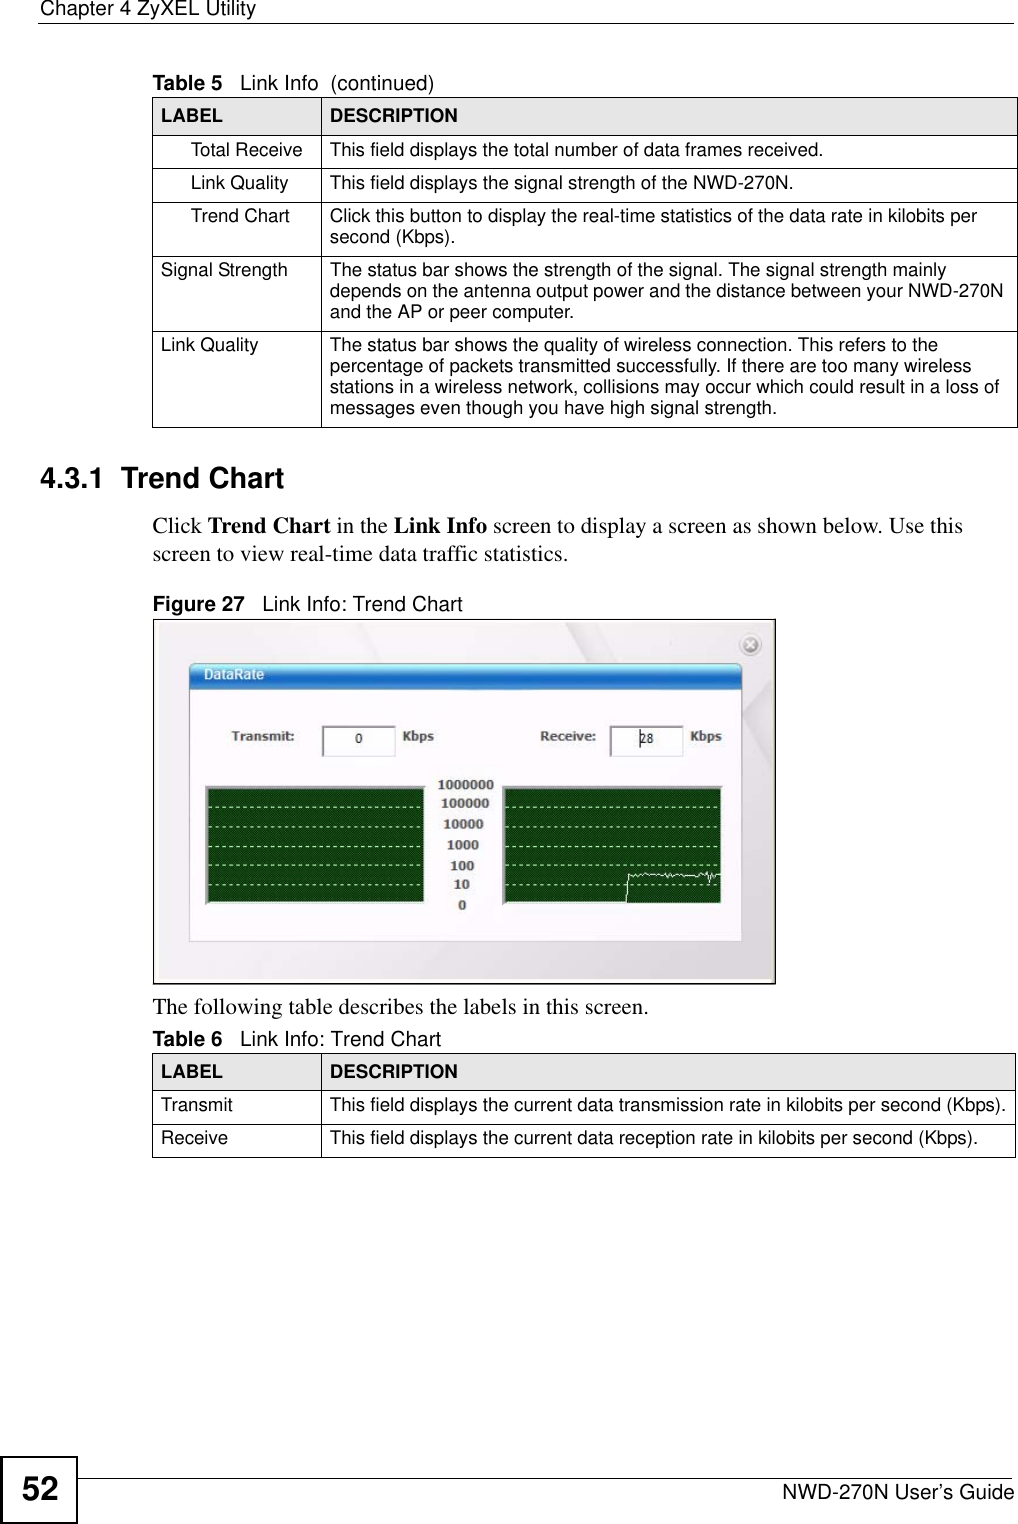 Chapter 4 ZyXEL UtilityNWD-270N User’s Guide524.3.1  Trend Chart Click Trend Chart in the Link Info screen to display a screen as shown below. Use this screen to view real-time data traffic statistics.Figure 27   Link Info: Trend Chart The following table describes the labels in this screen. Total Receive  This field displays the total number of data frames received.Link Quality   This field displays the signal strength of the NWD-270N.Trend Chart  Click this button to display the real-time statistics of the data rate in kilobits per second (Kbps).Signal Strength  The status bar shows the strength of the signal. The signal strength mainly depends on the antenna output power and the distance between your NWD-270N and the AP or peer computer.Link Quality  The status bar shows the quality of wireless connection. This refers to the percentage of packets transmitted successfully. If there are too many wireless stations in a wireless network, collisions may occur which could result in a loss of messages even though you have high signal strength.Table 5   Link Info  (continued)LABEL DESCRIPTIONTable 6   Link Info: Trend Chart LABEL DESCRIPTIONTransmit This field displays the current data transmission rate in kilobits per second (Kbps).Receive This field displays the current data reception rate in kilobits per second (Kbps).